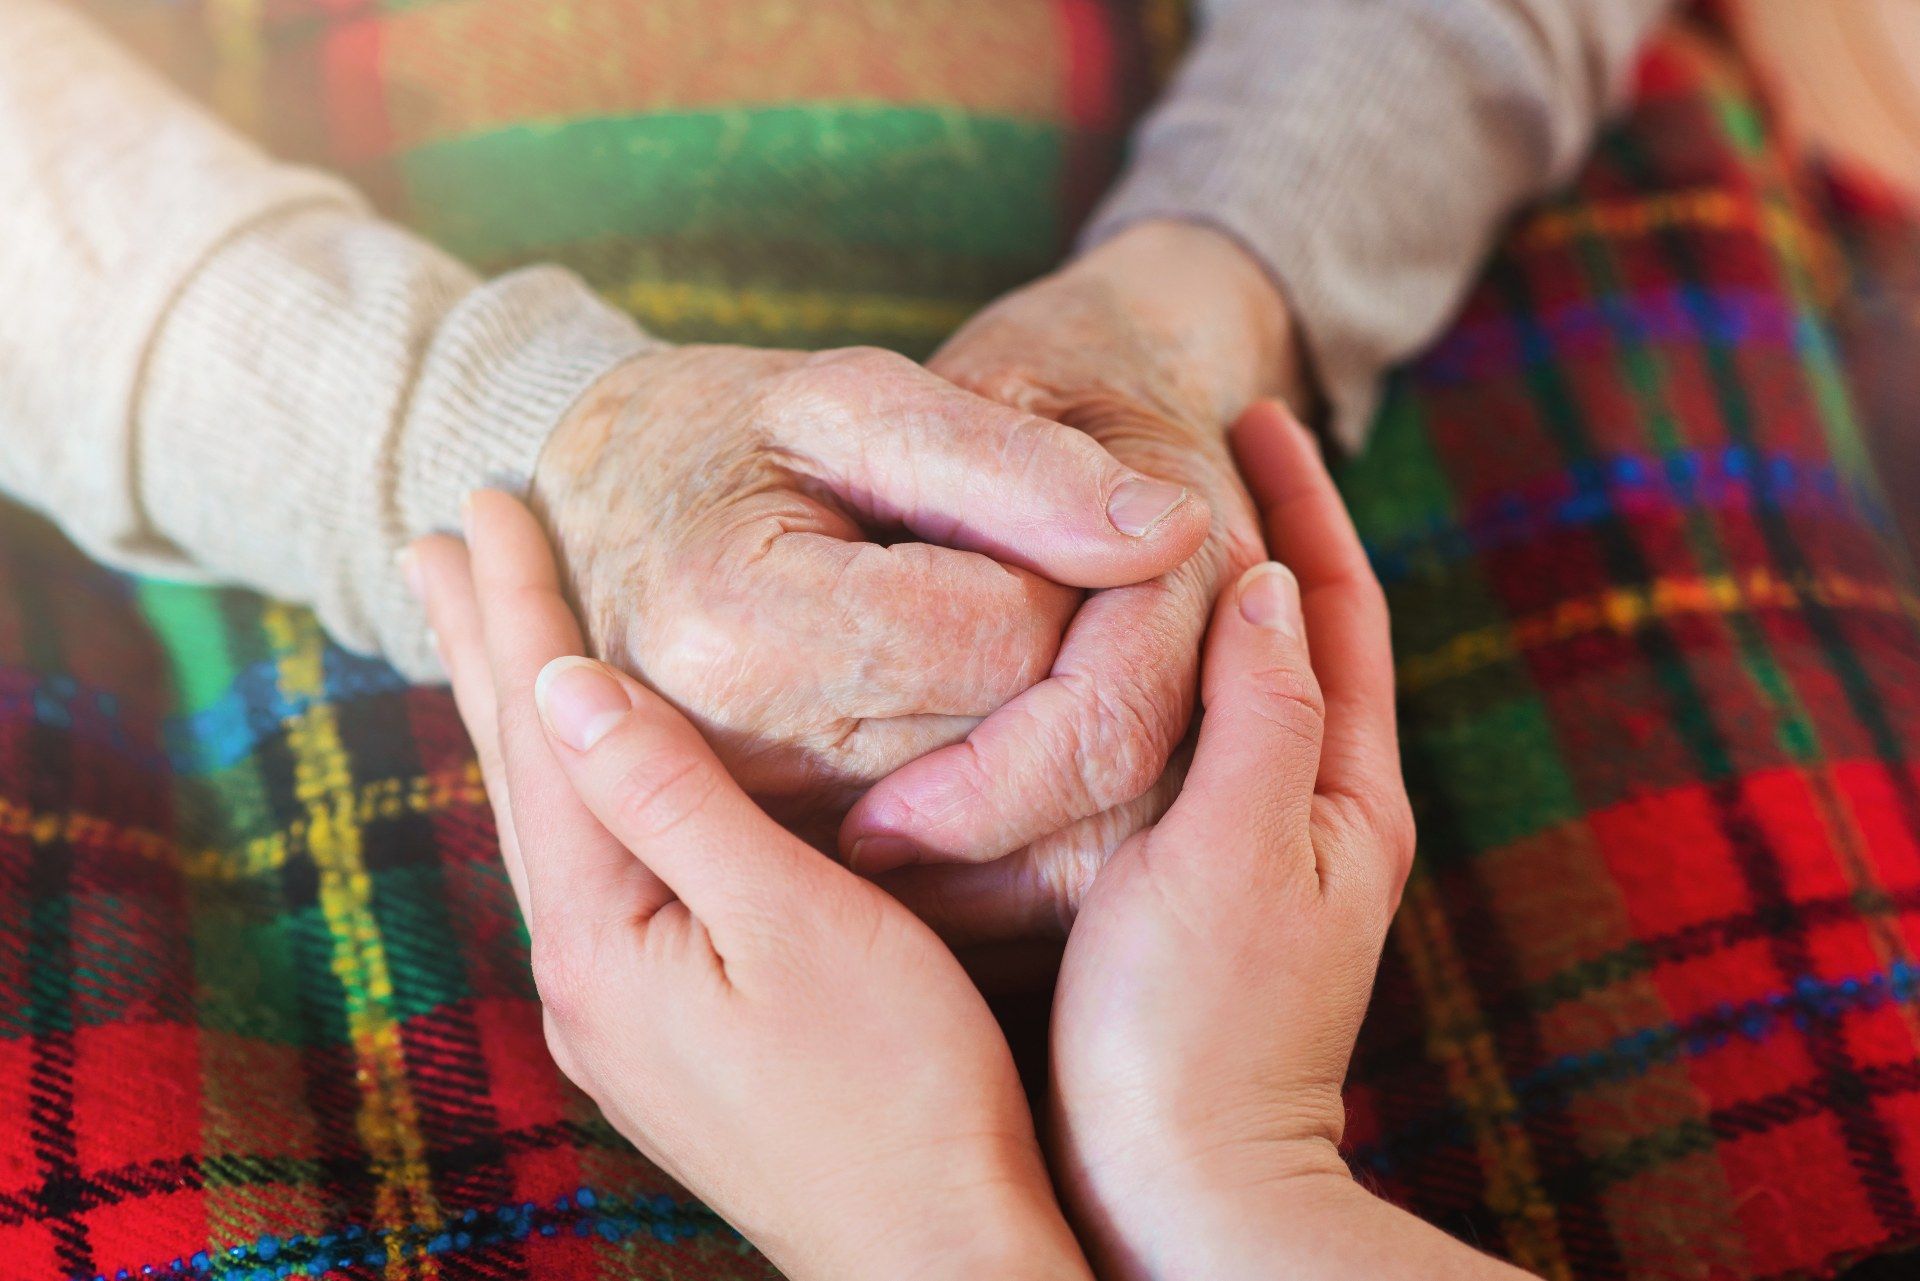 Closeup of a young person's hands holding the hands of an elderly person on their lap - glenabbey manor